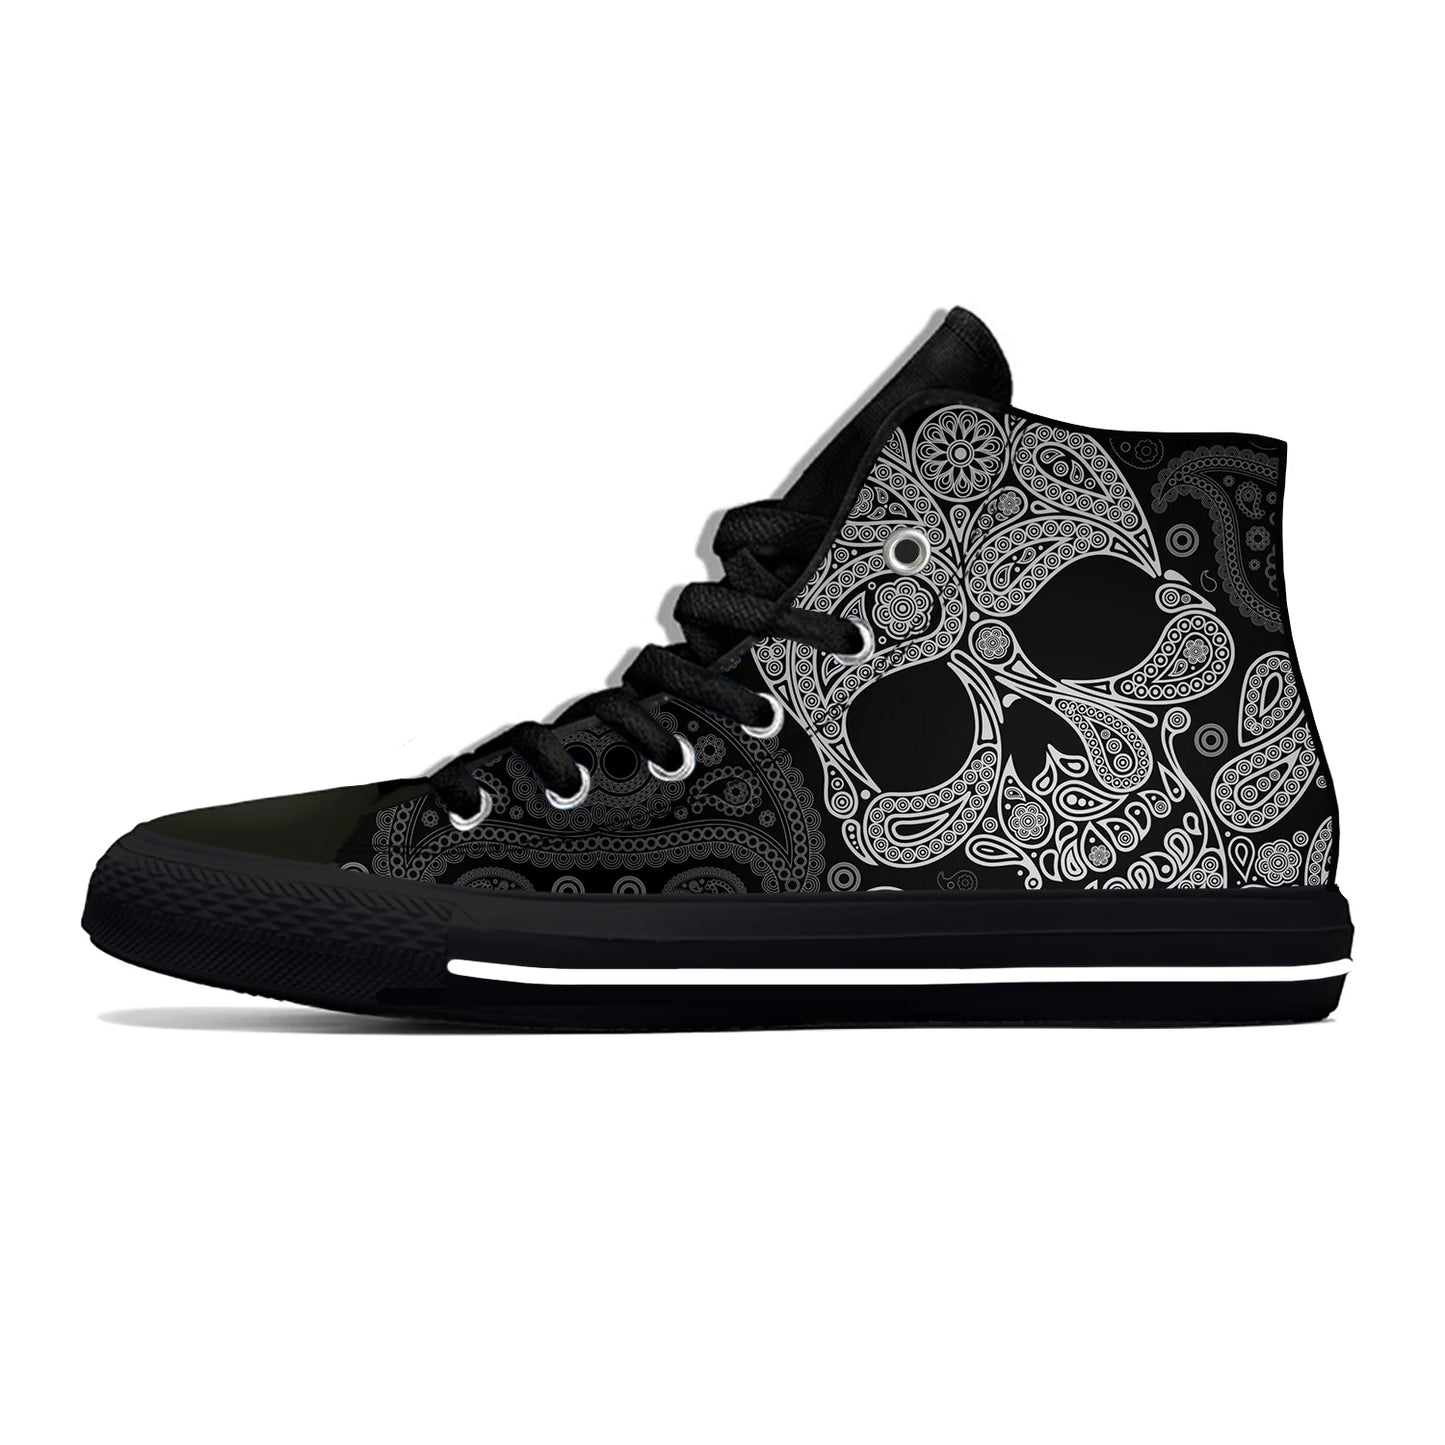 Hot SKull PAisley Gothic Goth Horror Punk Scary Cool High Top Breathable Men Women Summer Sneakers Lightweight Casual Shoes